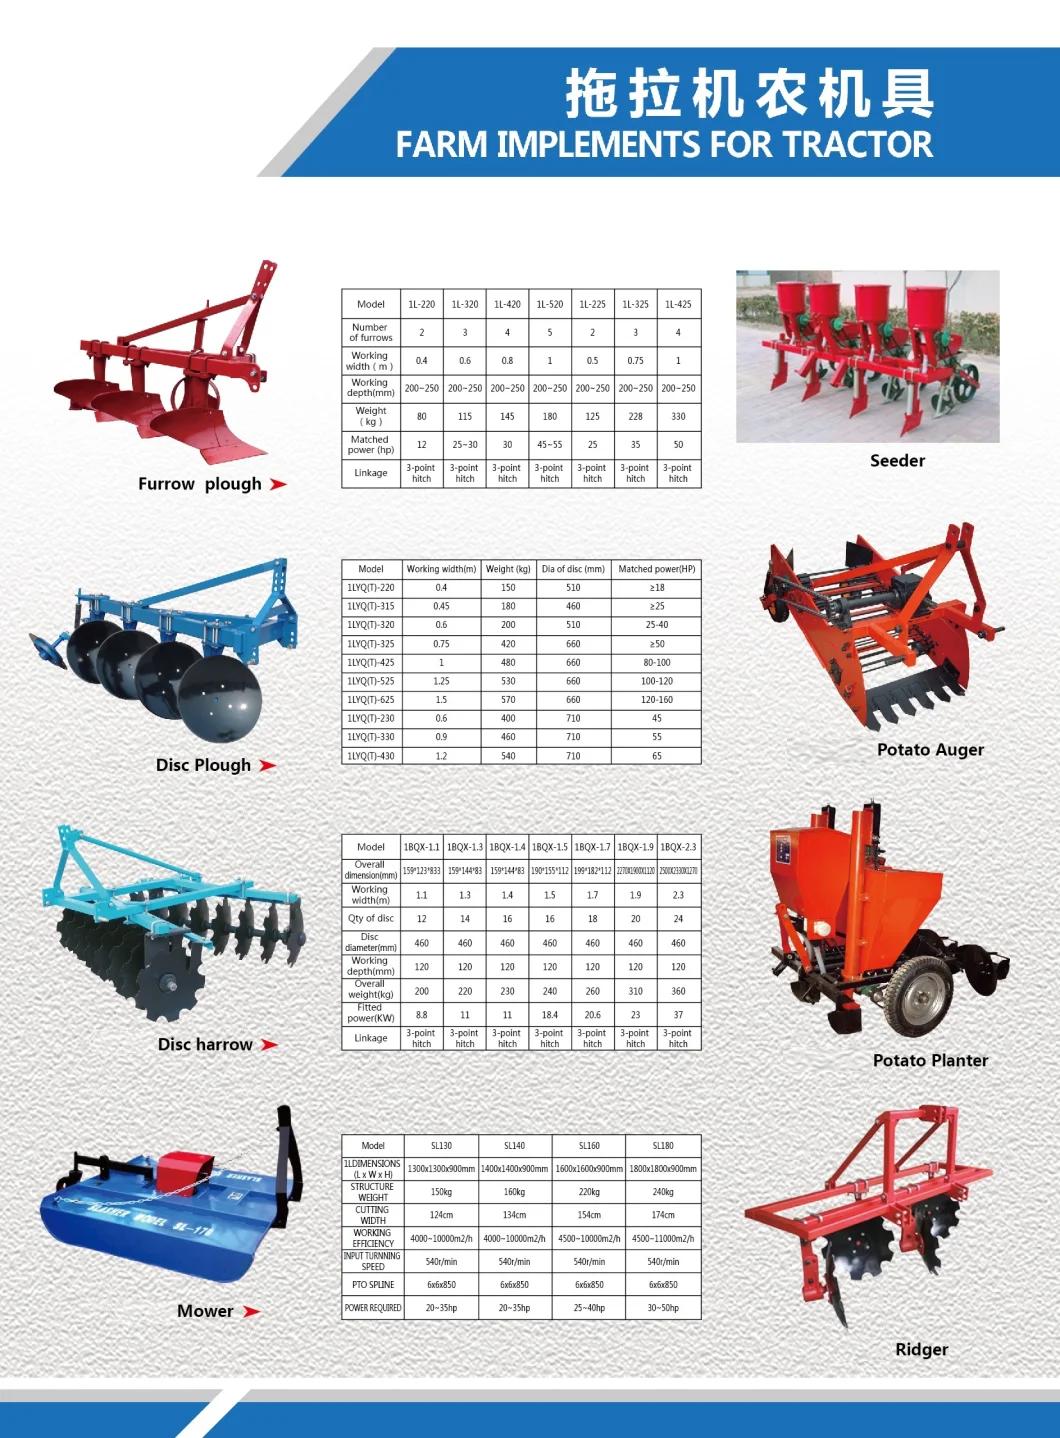 Promotion! Diesel Farm Thresher for Rice and Wheat for West Africa